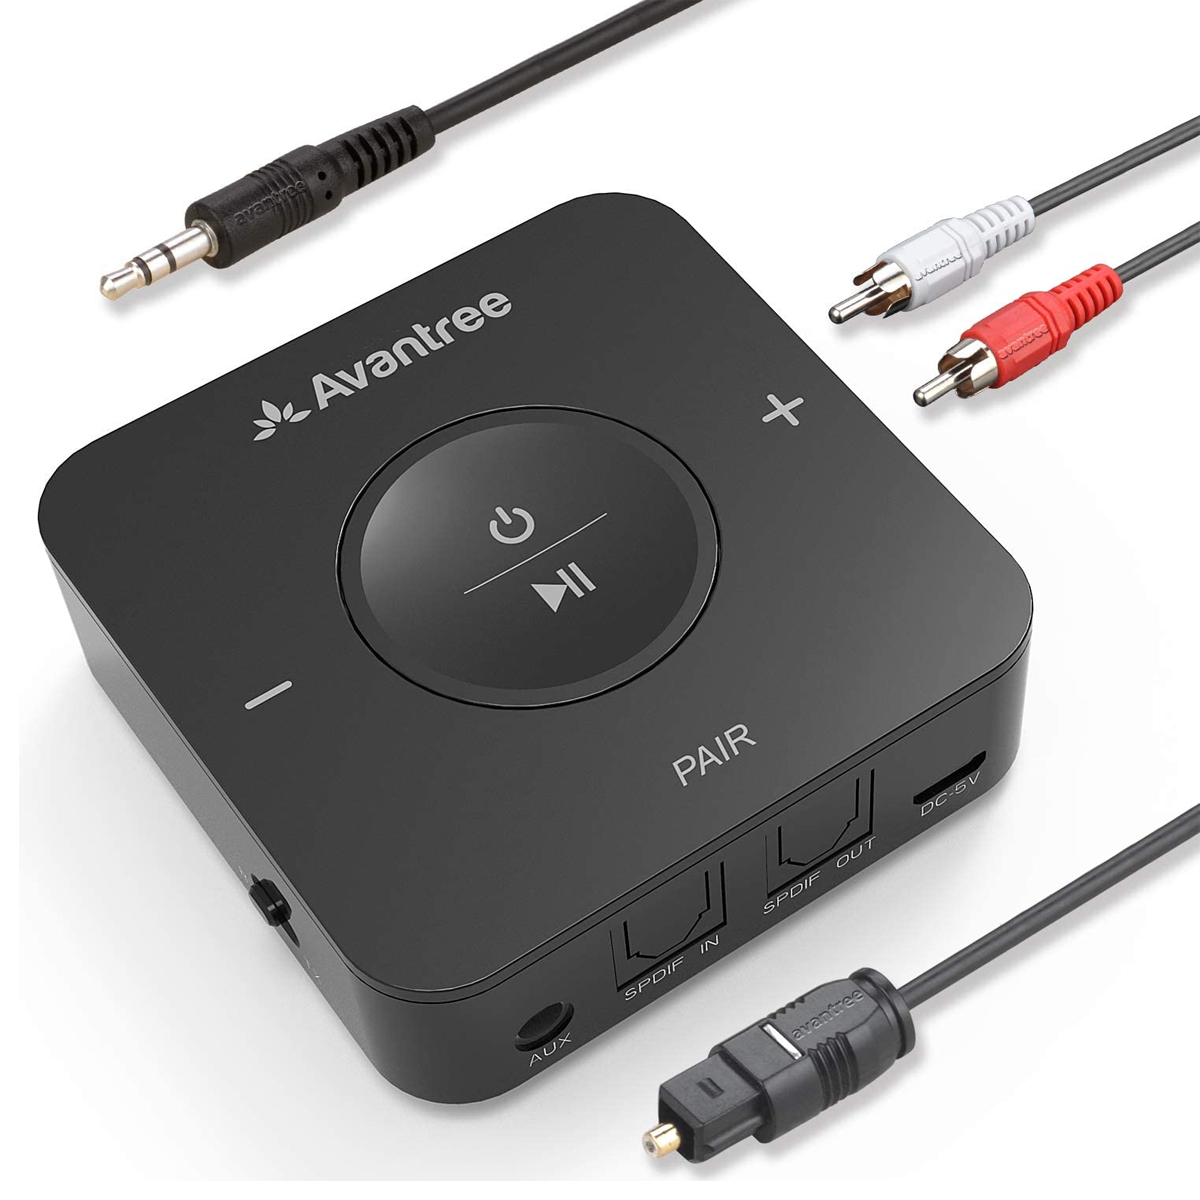 TC417 Low Latency Bluetooth Transmitter Receiver with Battery - Avantree